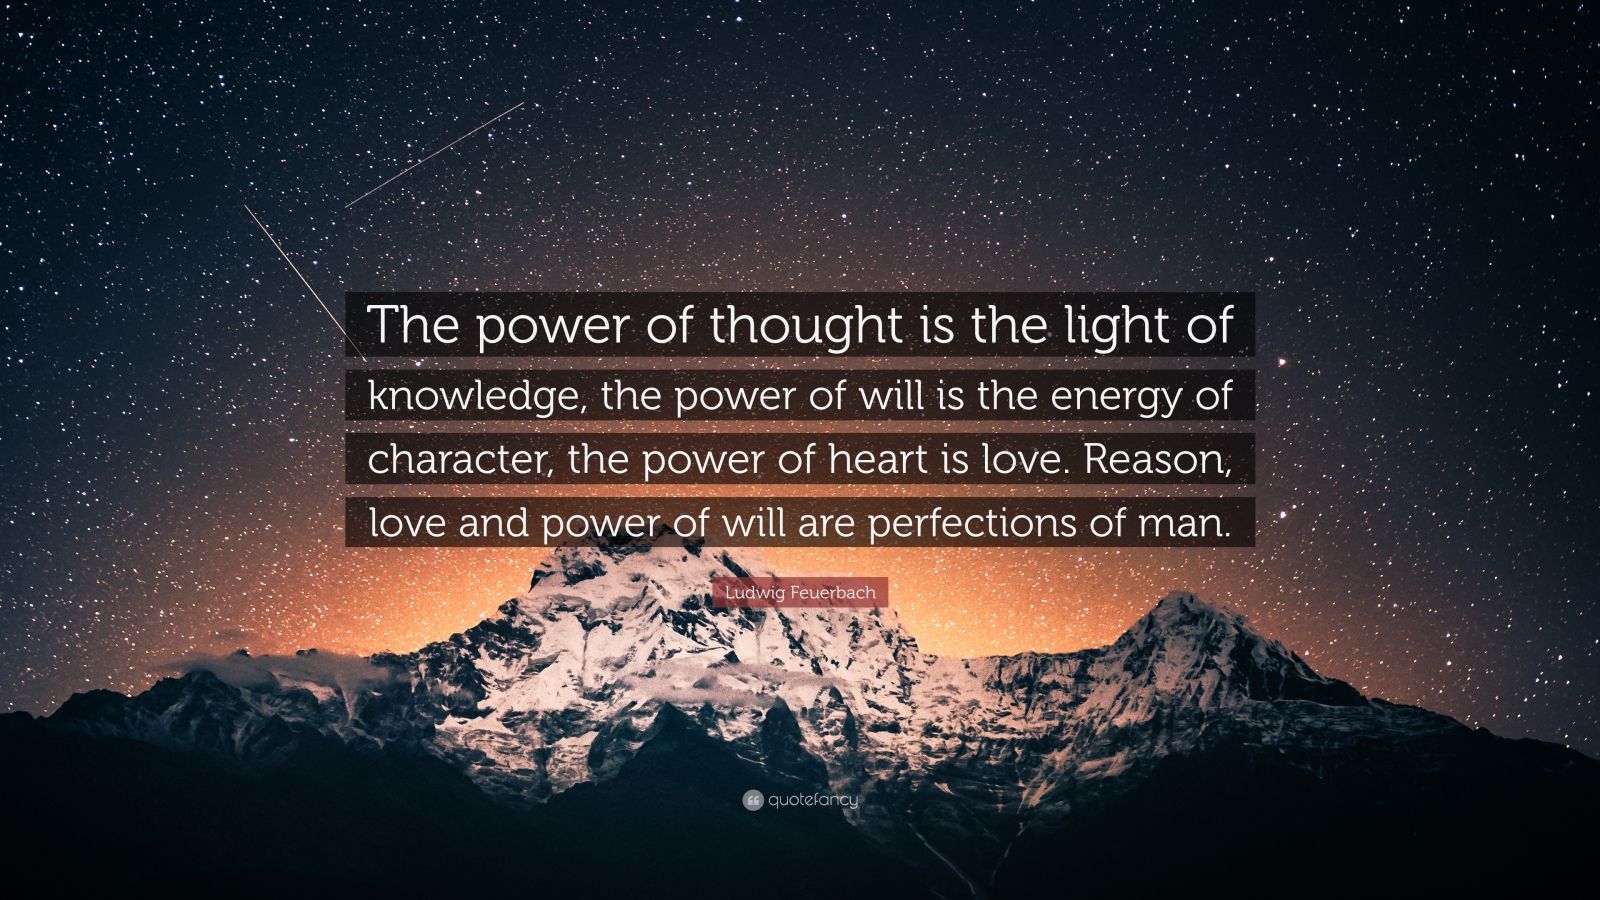 Feuerbach Quote: “The power of thought is the of knowledge, the power of will is the energy of character, the power of heart is love...”